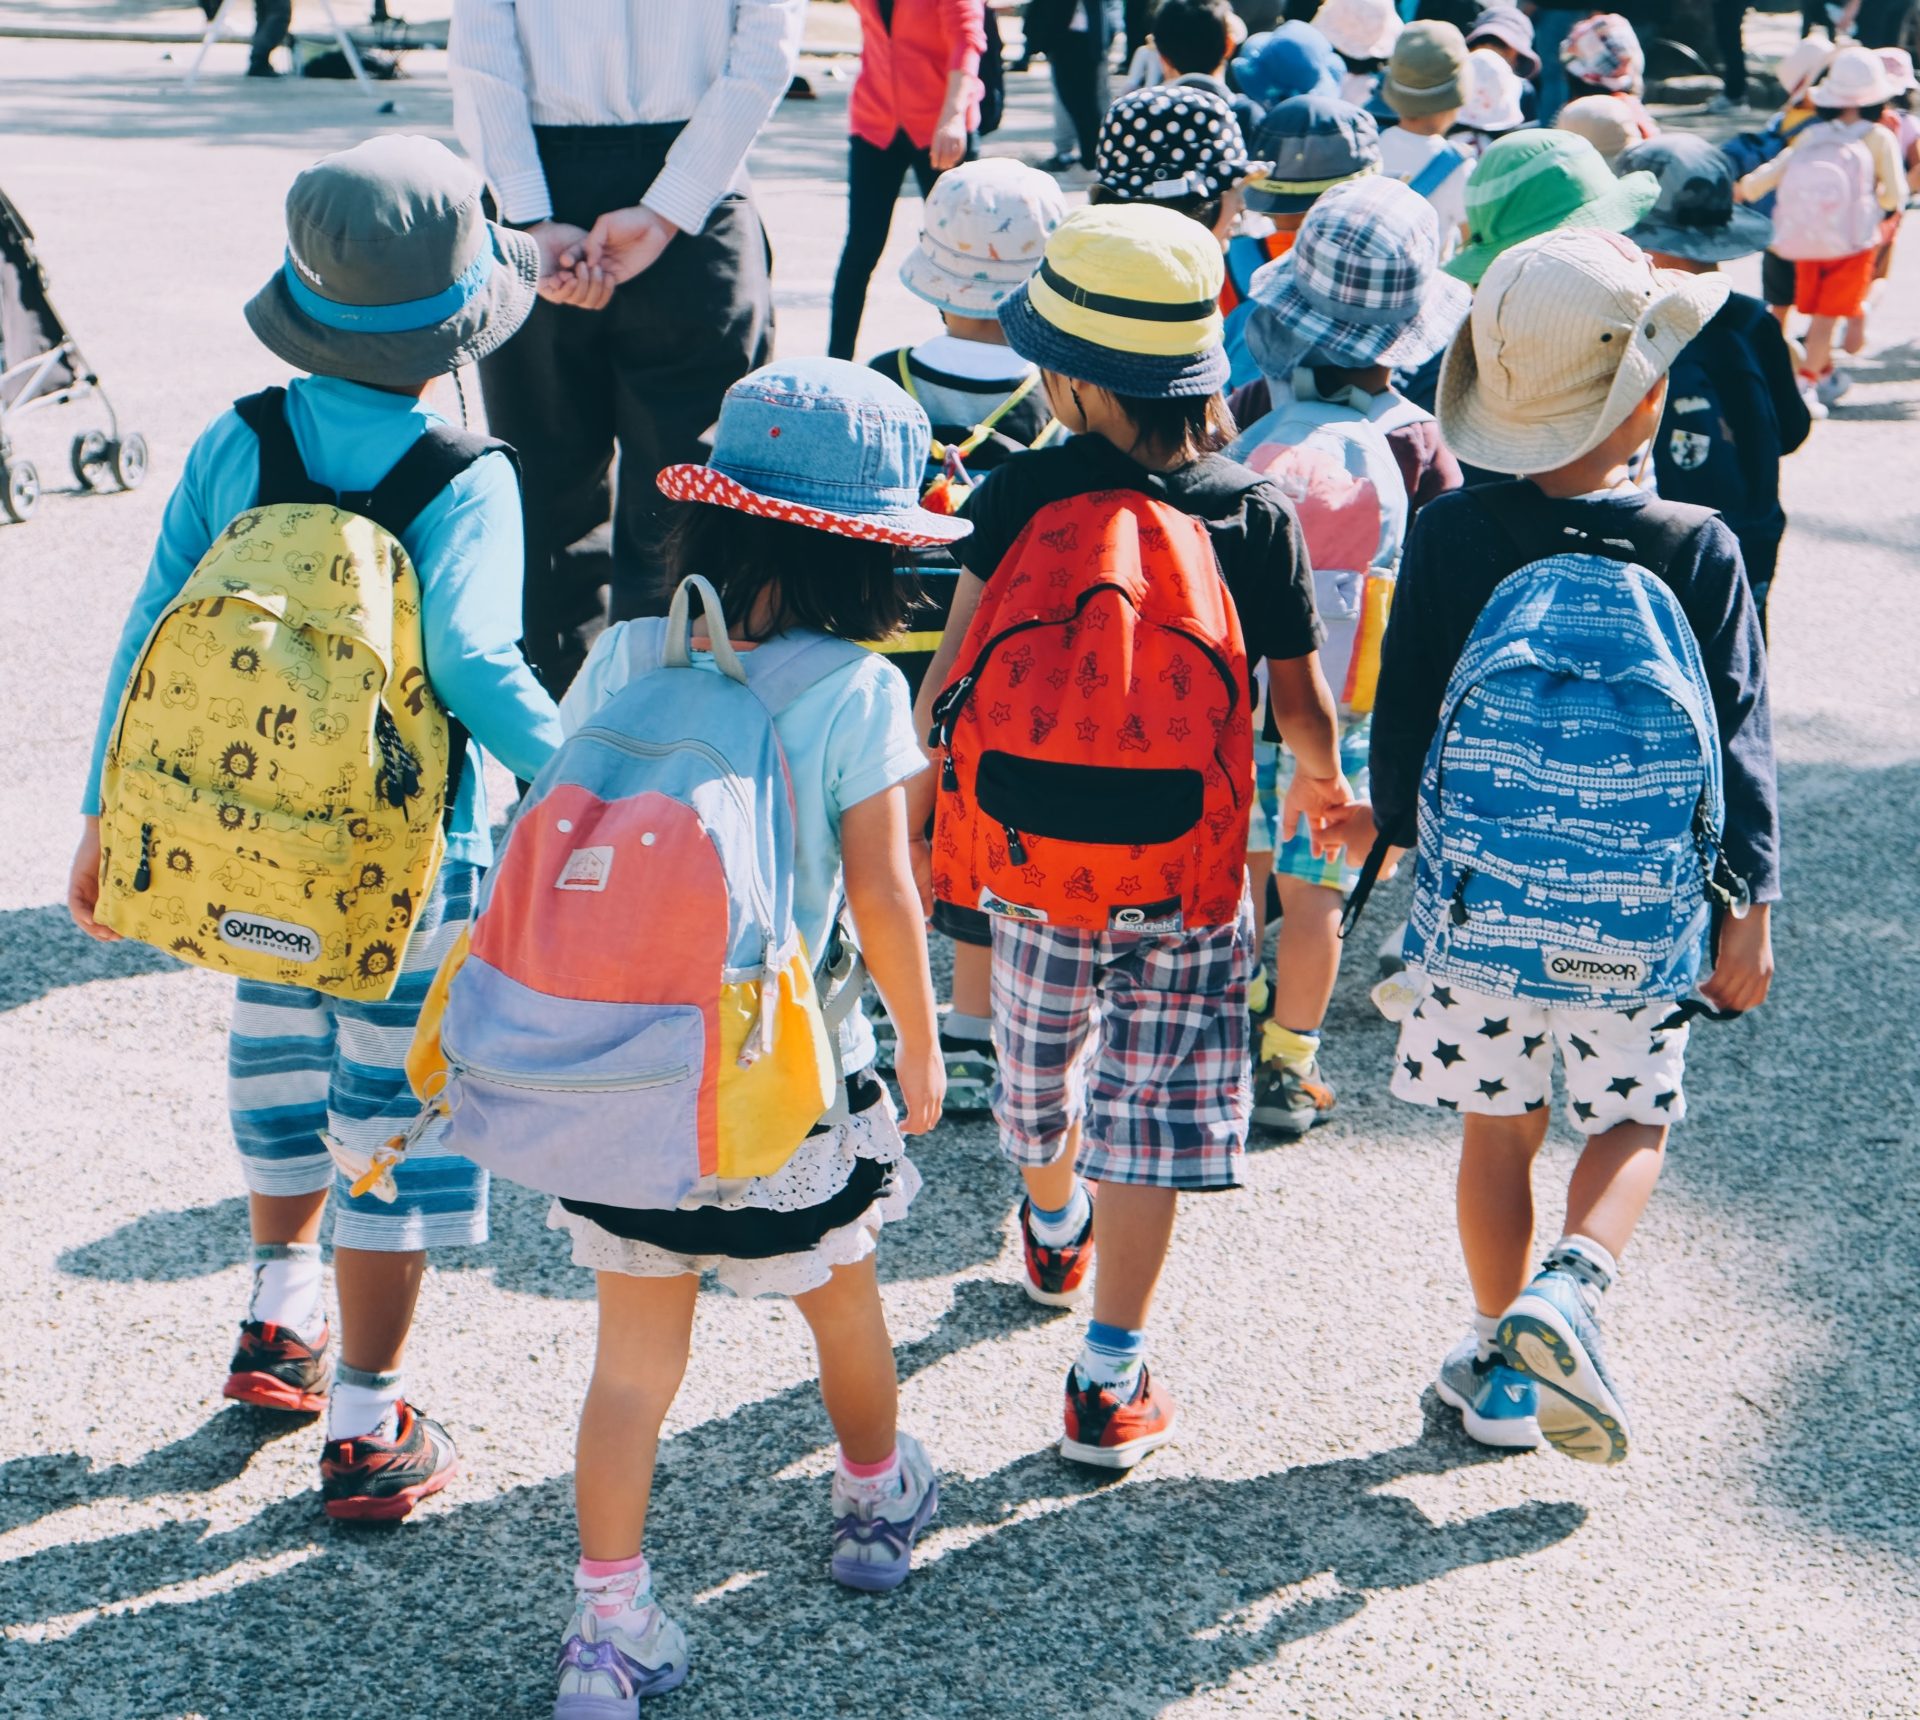 Children at school walking with backpacks